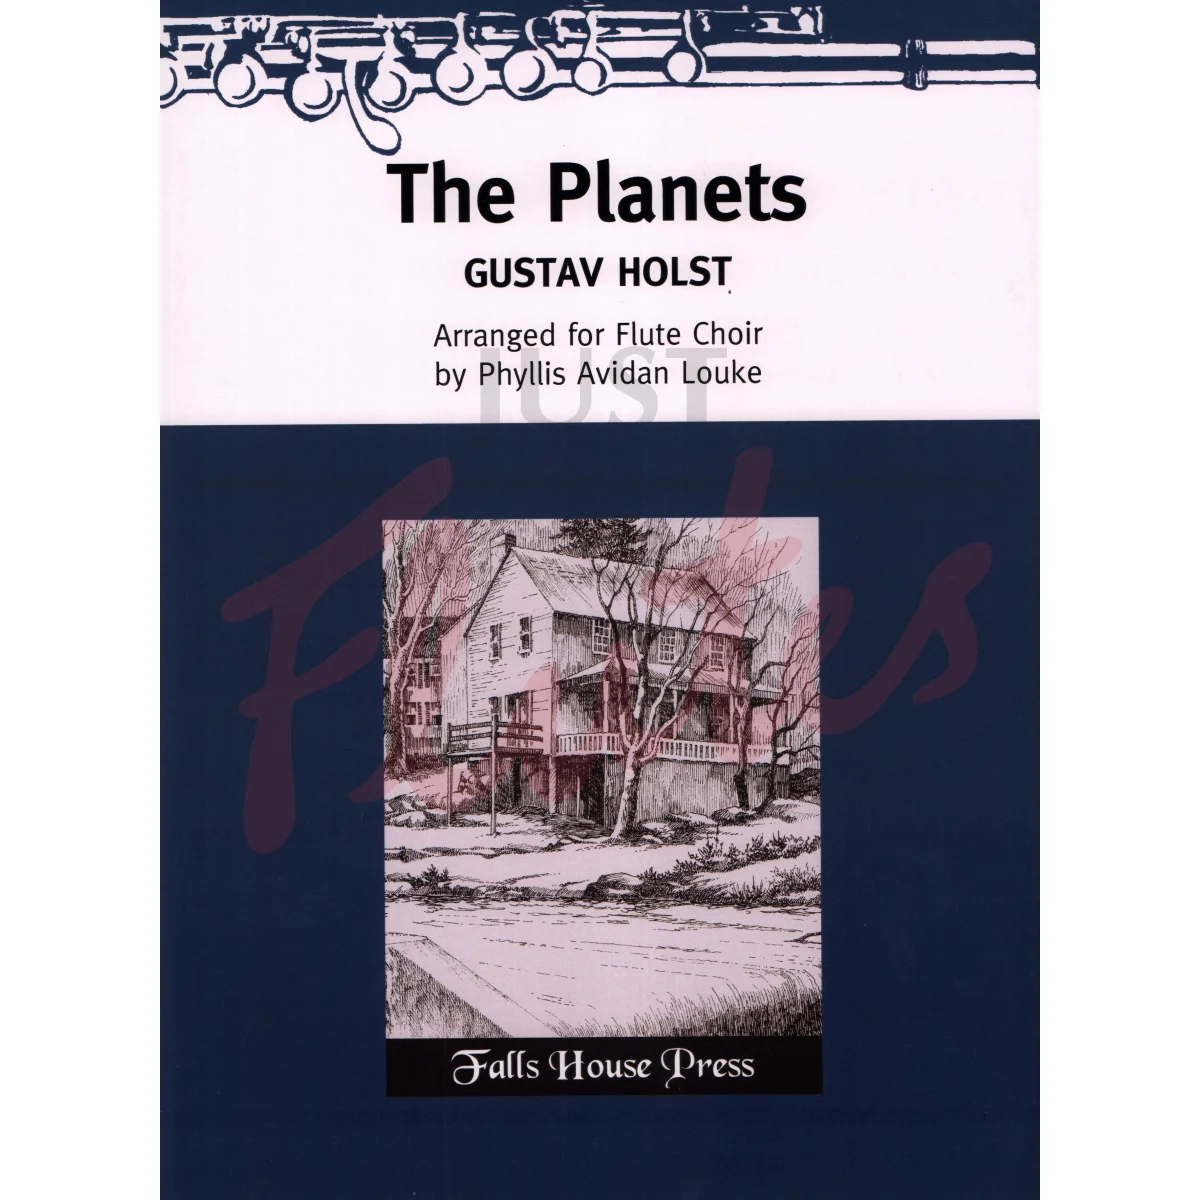 The Planets Suite for Flute Choir